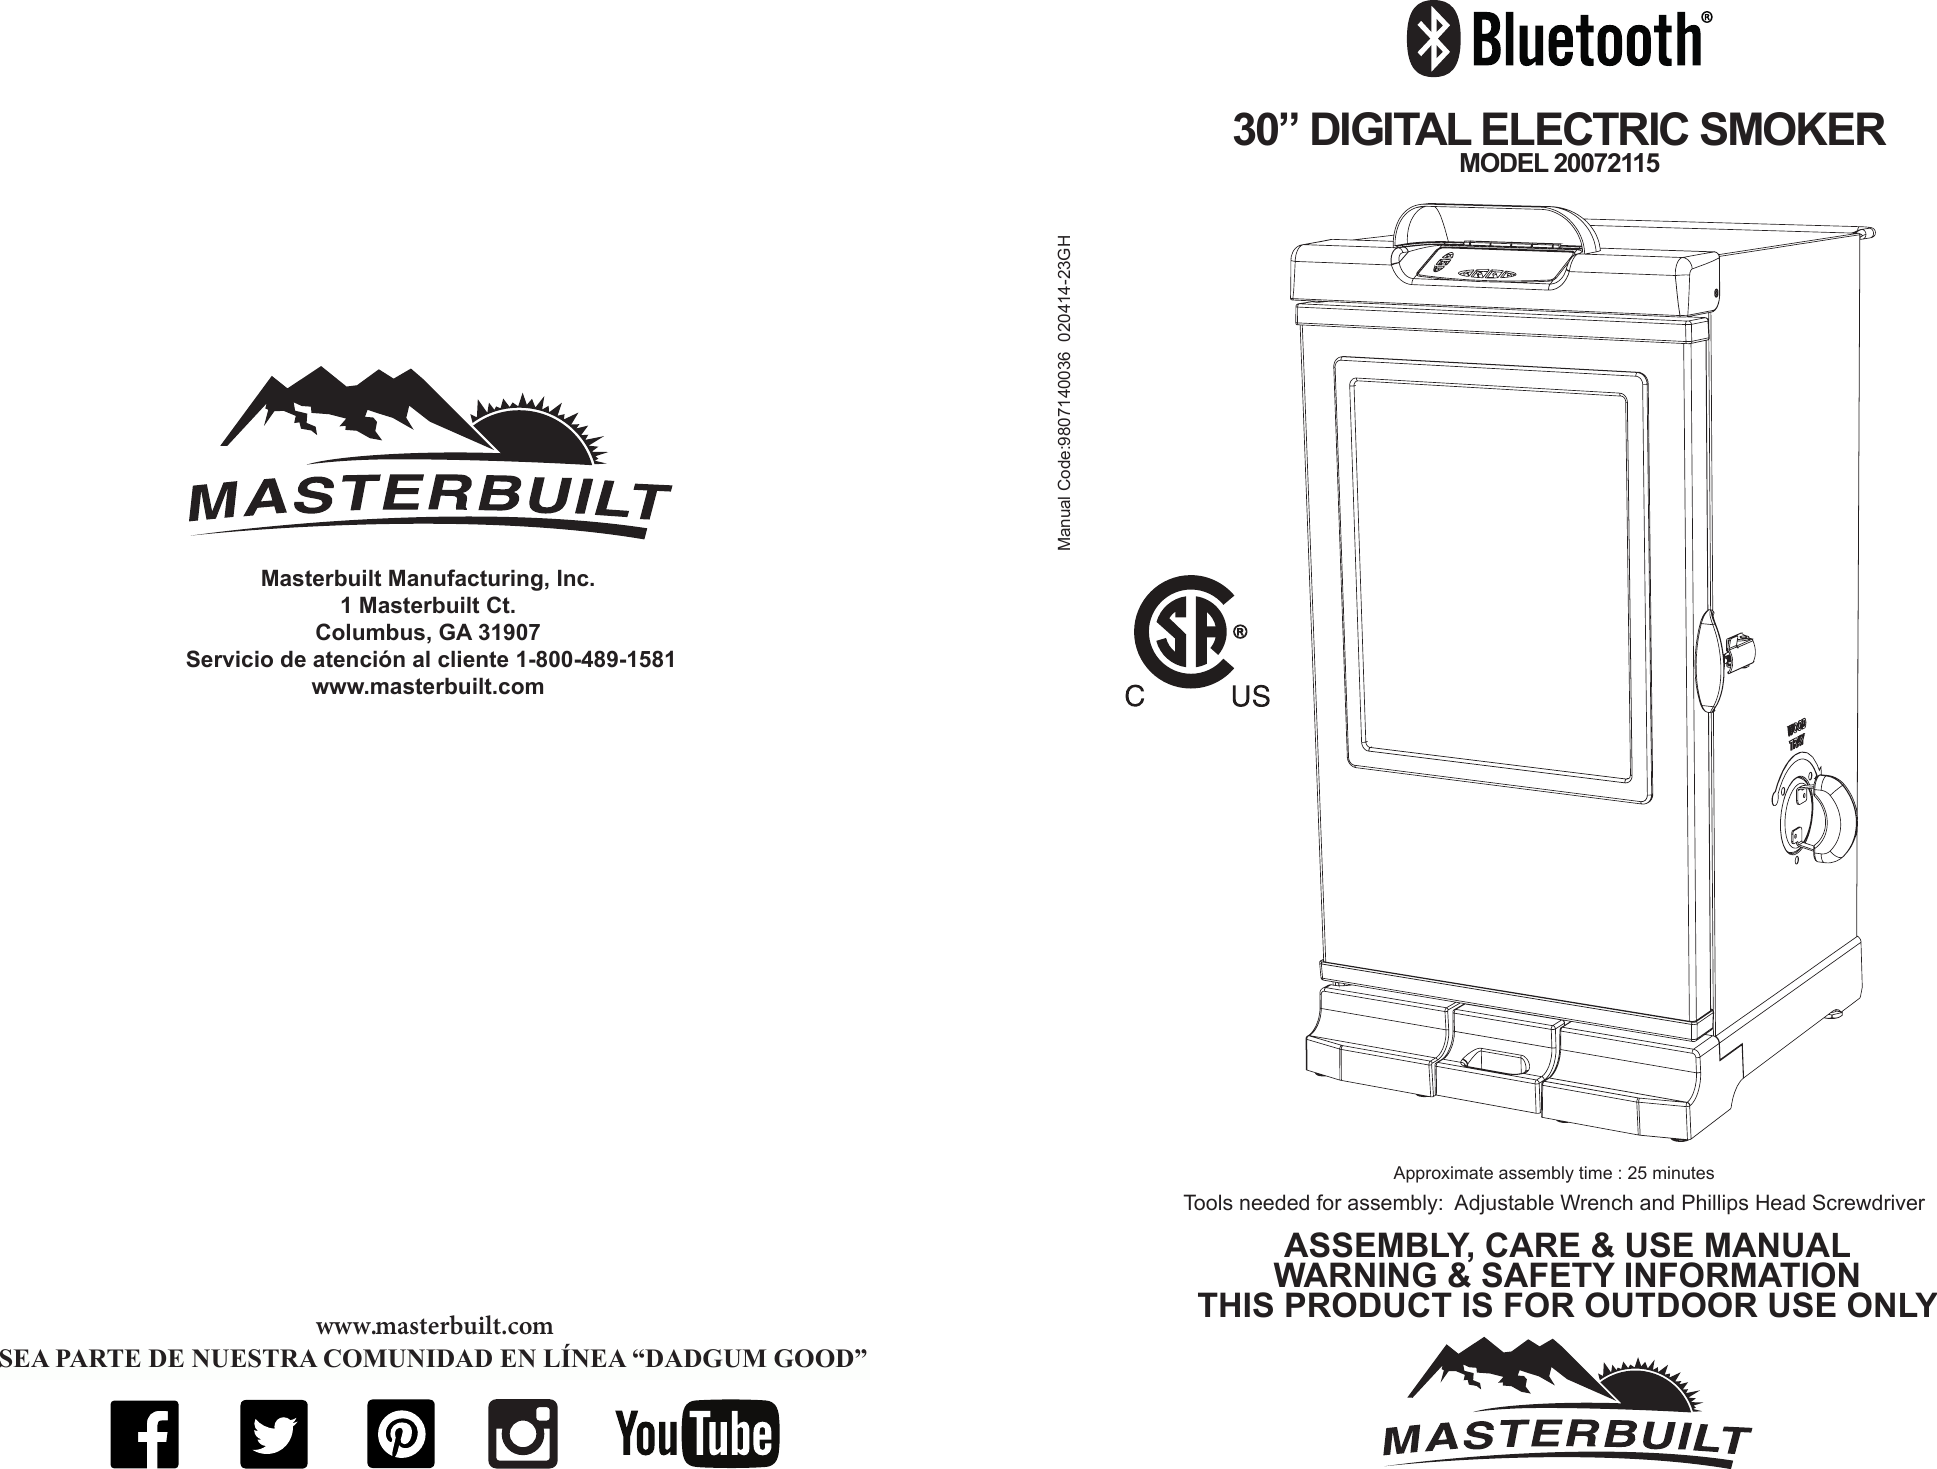 Masterbuilt Manufacturing, Inc.  1 Masterbuilt Ct.Columbus, GA 31907 Servicio de atención al cliente 1-800-489-1581www.masterbuilt.comwww.masterbuilt.comBE A PART OF OUR “DADGUM GOOD” COMMUNITY ONLINESEA PARTE DE NUESTRA COMUNIDAD EN LÍNEA “DADGUM GOOD”Manual Code:9807140036  020414-23GH30” DIGITAL ELECTRIC SMOKER MODEL 20072115Tools needed for assembly:  Adjustable Wrench and Phillips Head ScrewdriverApproximate assembly time : 25 minutesASSEMBLY, CARE &amp; USE MANUAL WARNING &amp; SAFETY INFORMATIONTHIS PRODUCT IS FOR OUTDOOR USE ONLY